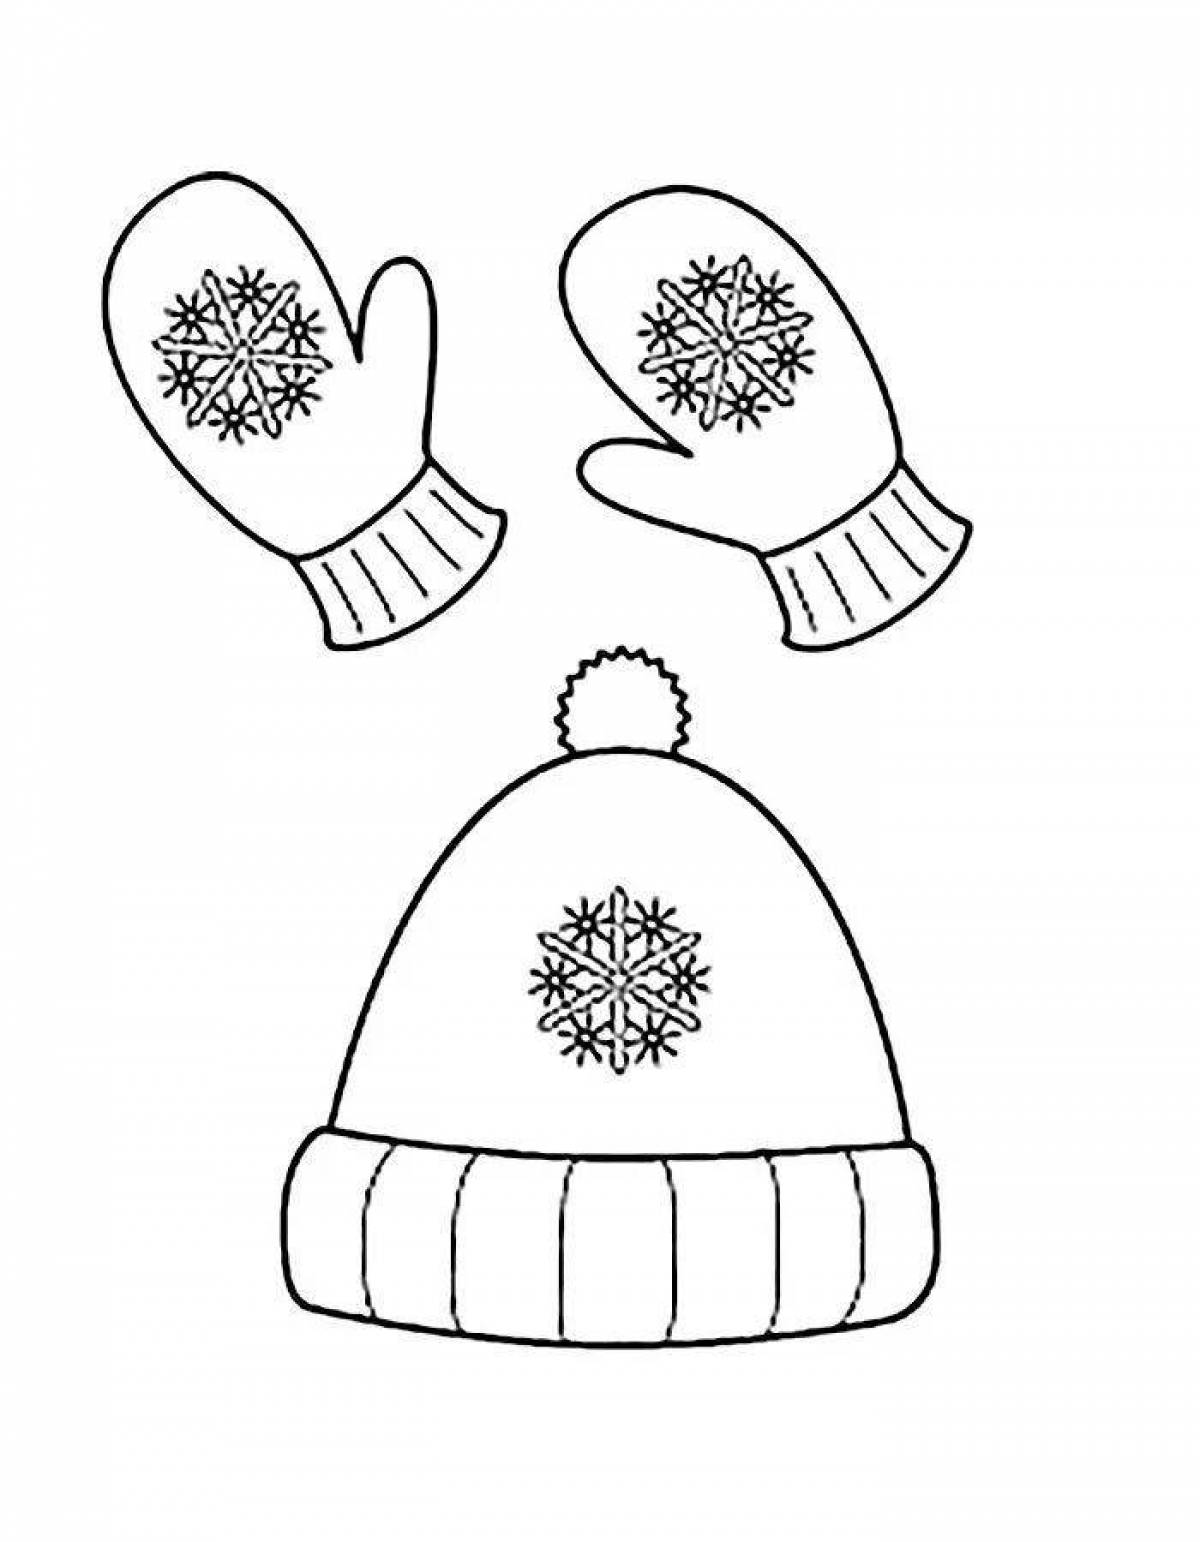 Coloring page bright winter hat for children